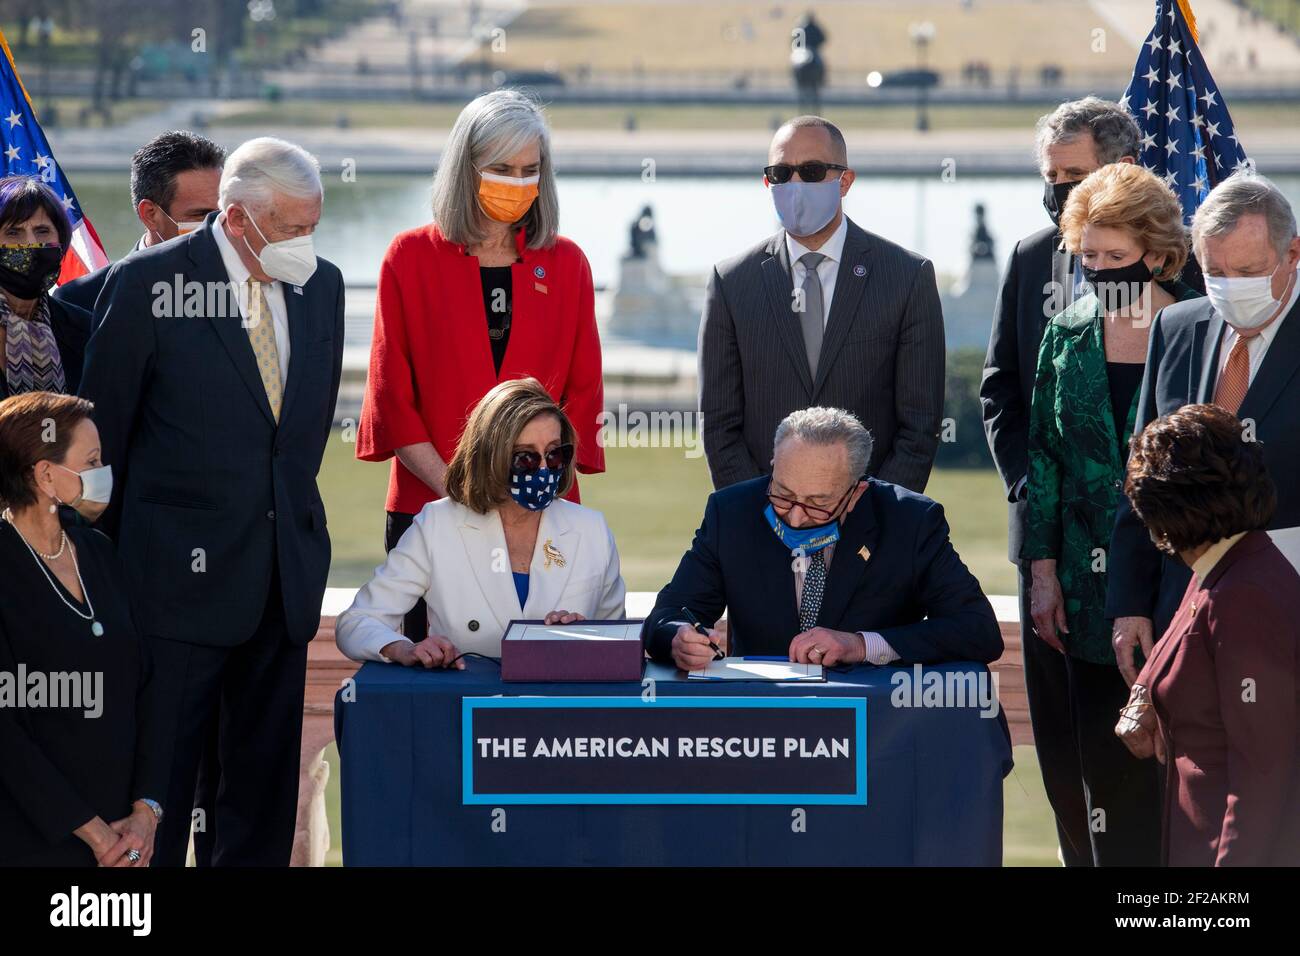 CAPTION CORRECTION: Speaker of the United States House of Representatives Nancy Pelosi (Democrat of California) and United States Senate Majority Leader Chuck Schumer (Democrat of New York) sign the American Rescue Plan Act of 2021, during an enrollment ceremony, on the West Terrace of the U.S. Capitol in Washington, DC, Wednesday, March 10, 2021. Credit: Rod Lamkey / CNP/Sipa USA Stock Photo